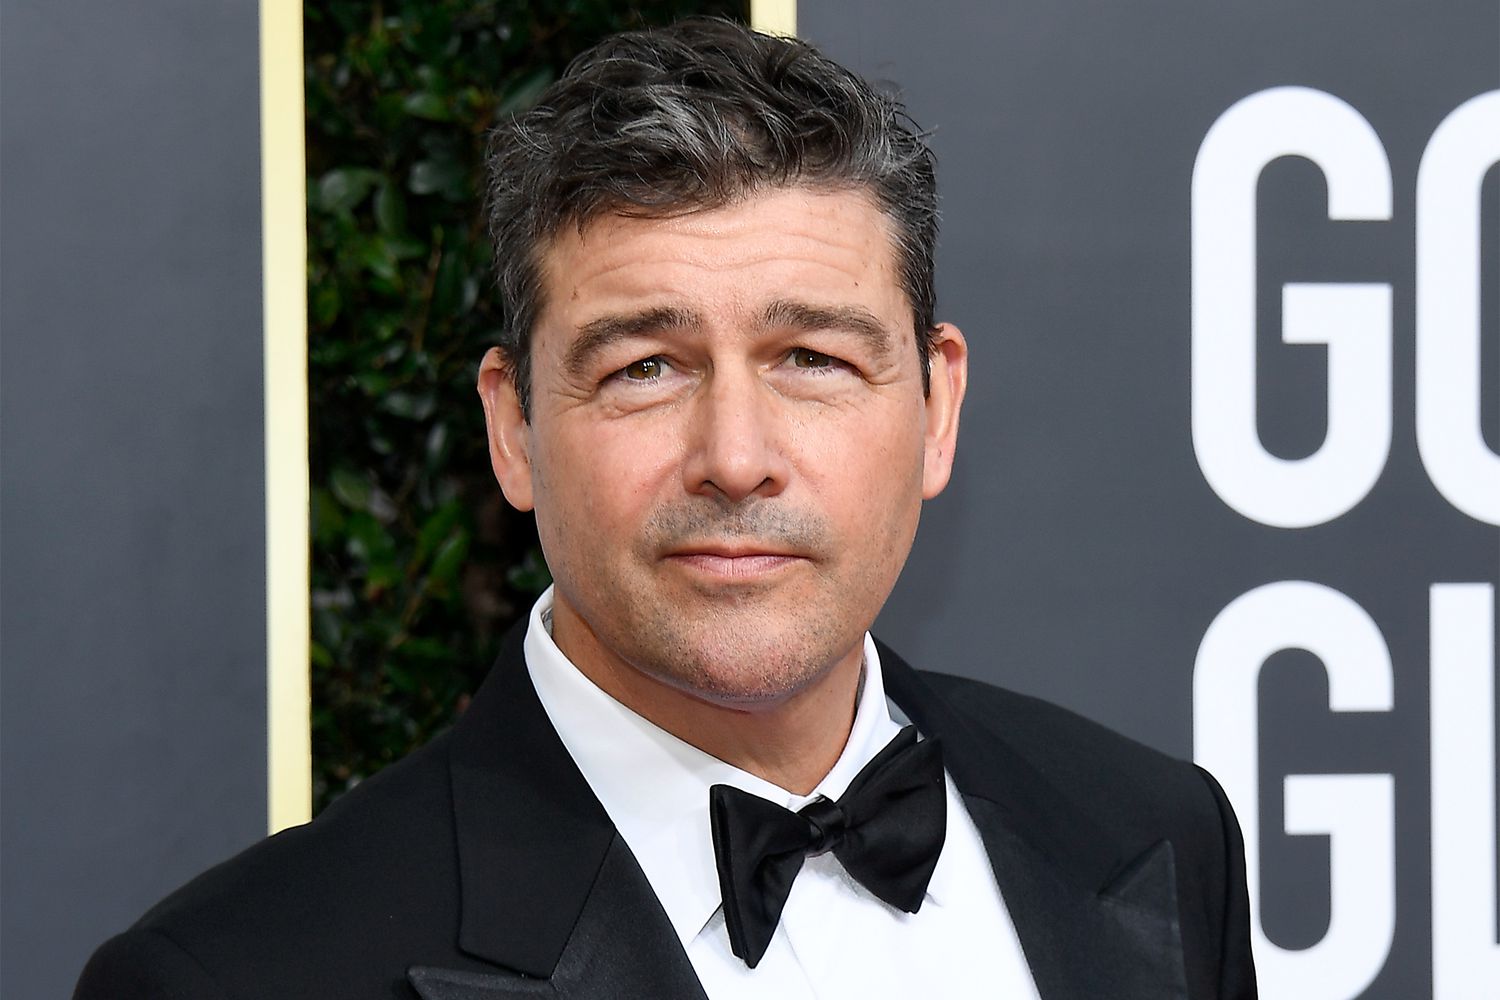 Kyle Chandler Biography: Movies, Age, Wife, Net Worth, Height, Children, TV Shows, Parents, Family